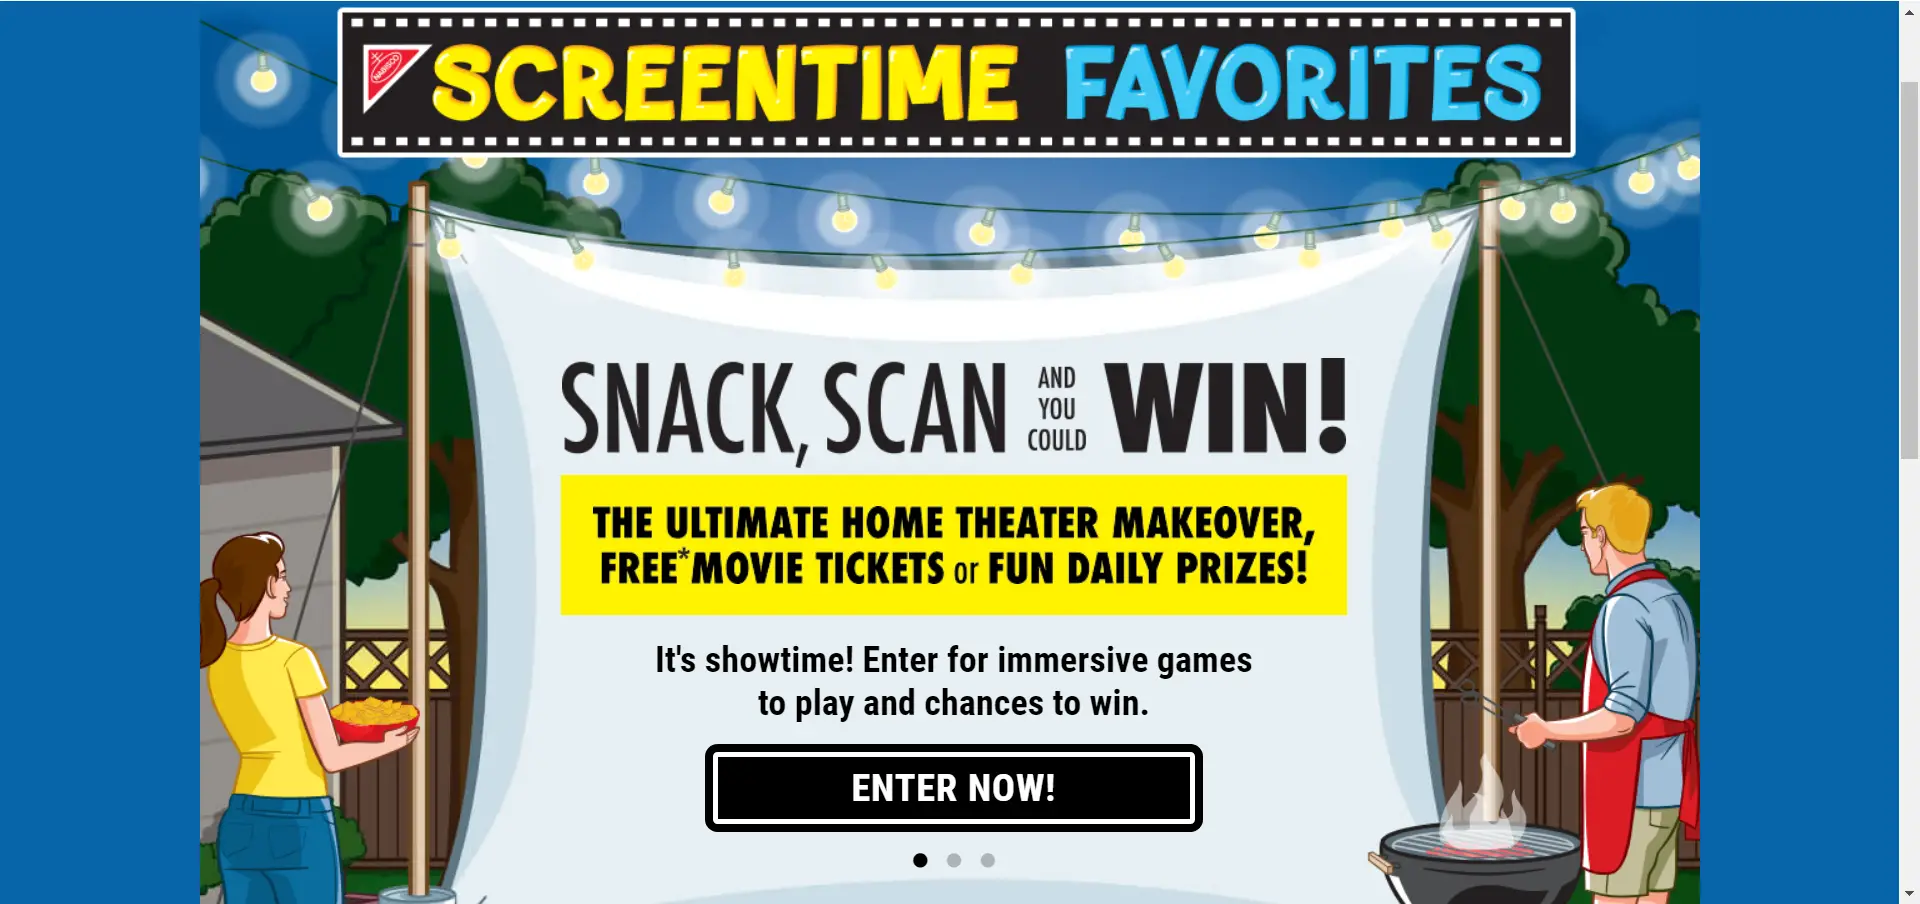 Sit back, relax and enjoy the NABISCO Screentime Favorites and then enter your Name and Email Address to begin playing games, earning chances at prizes in the Nabisco Screentime Favorites Instant Win Game